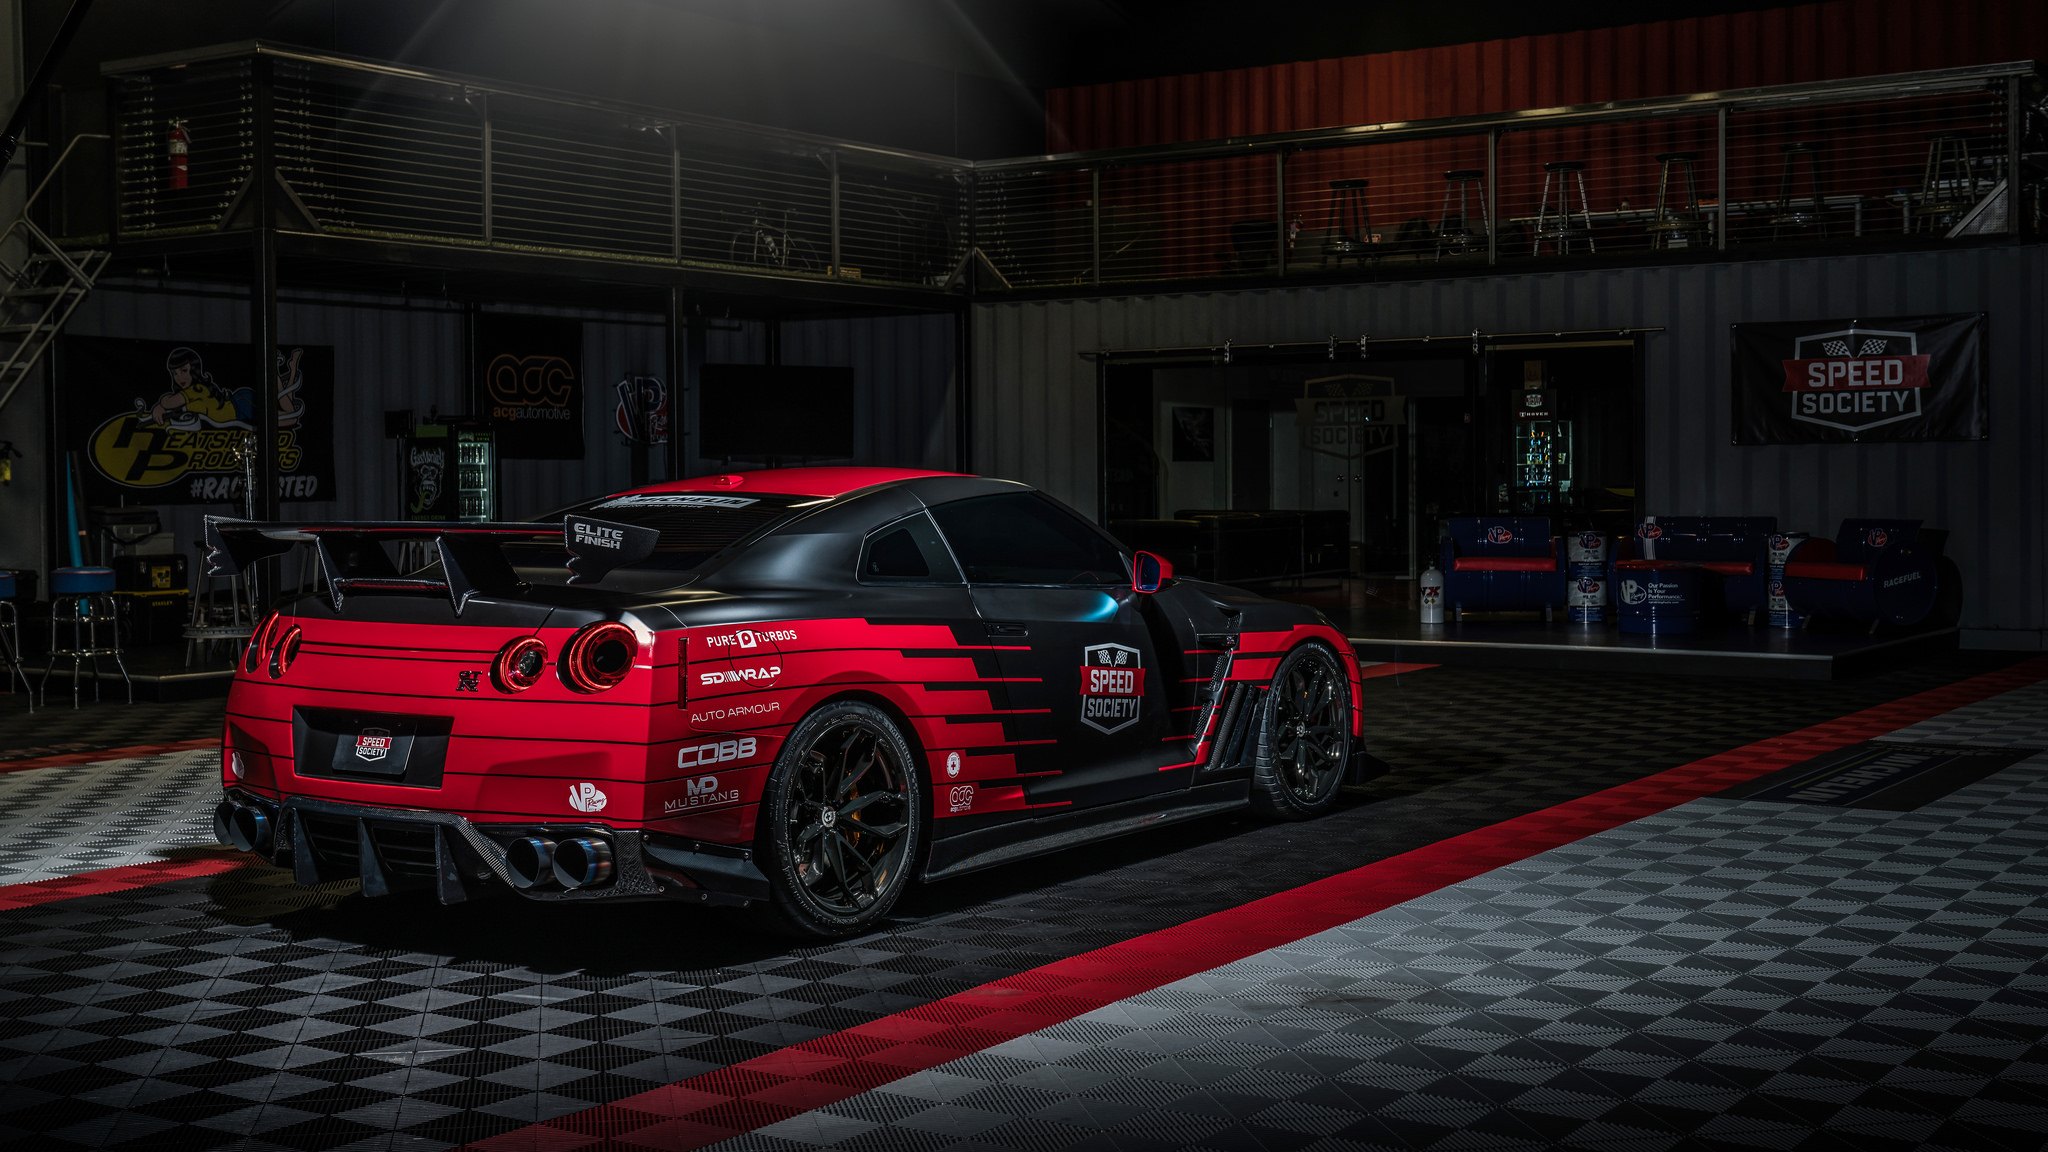 Large Wing Spoiler on Race Inspired Nissan GT-R - Photo by HRE Wheels